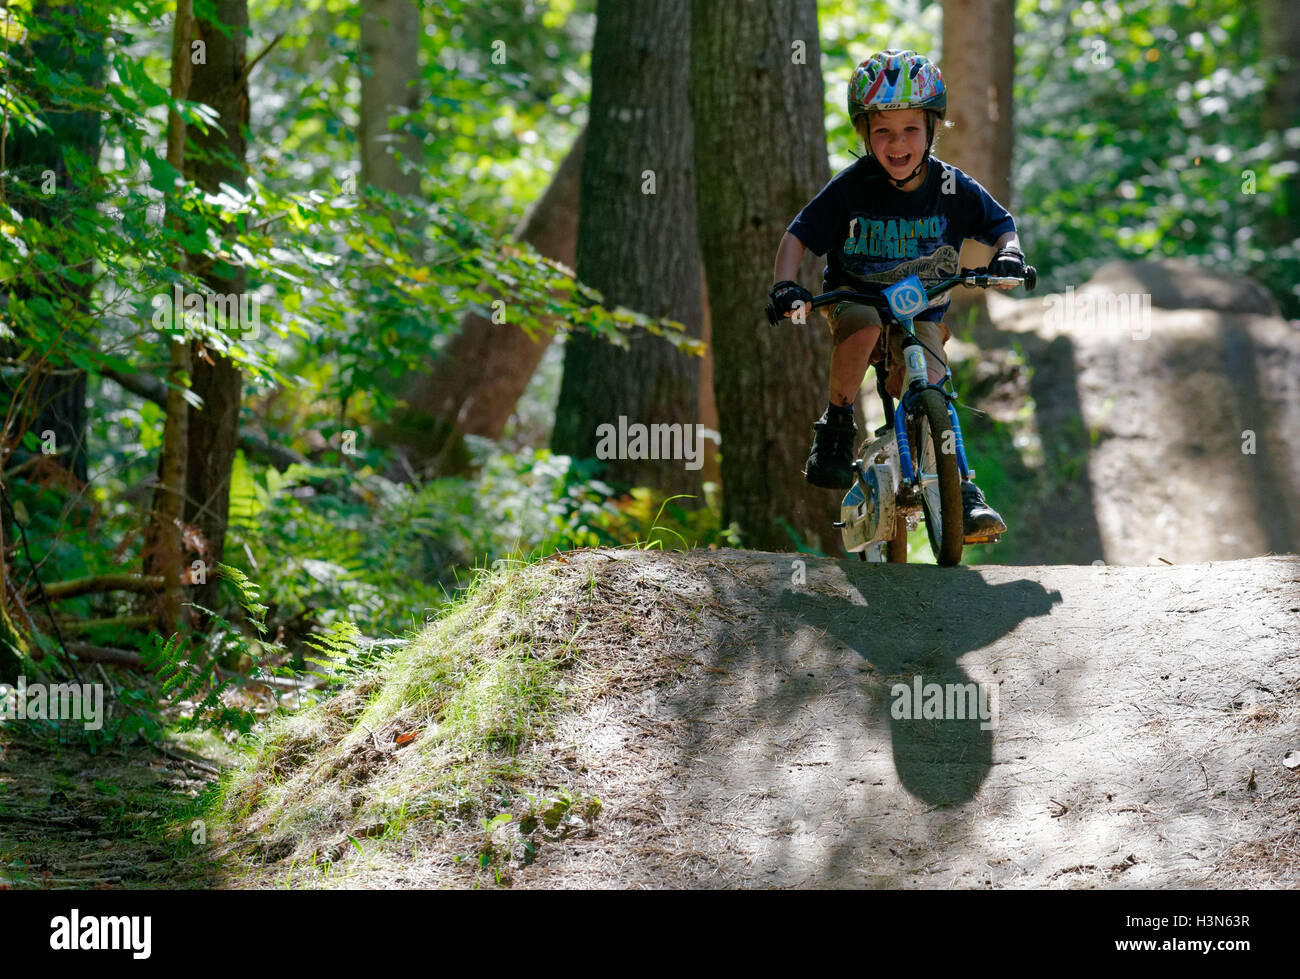 A young (4 year old) boy riding his bike in the wood on a mountain bike pump track Stock Photo